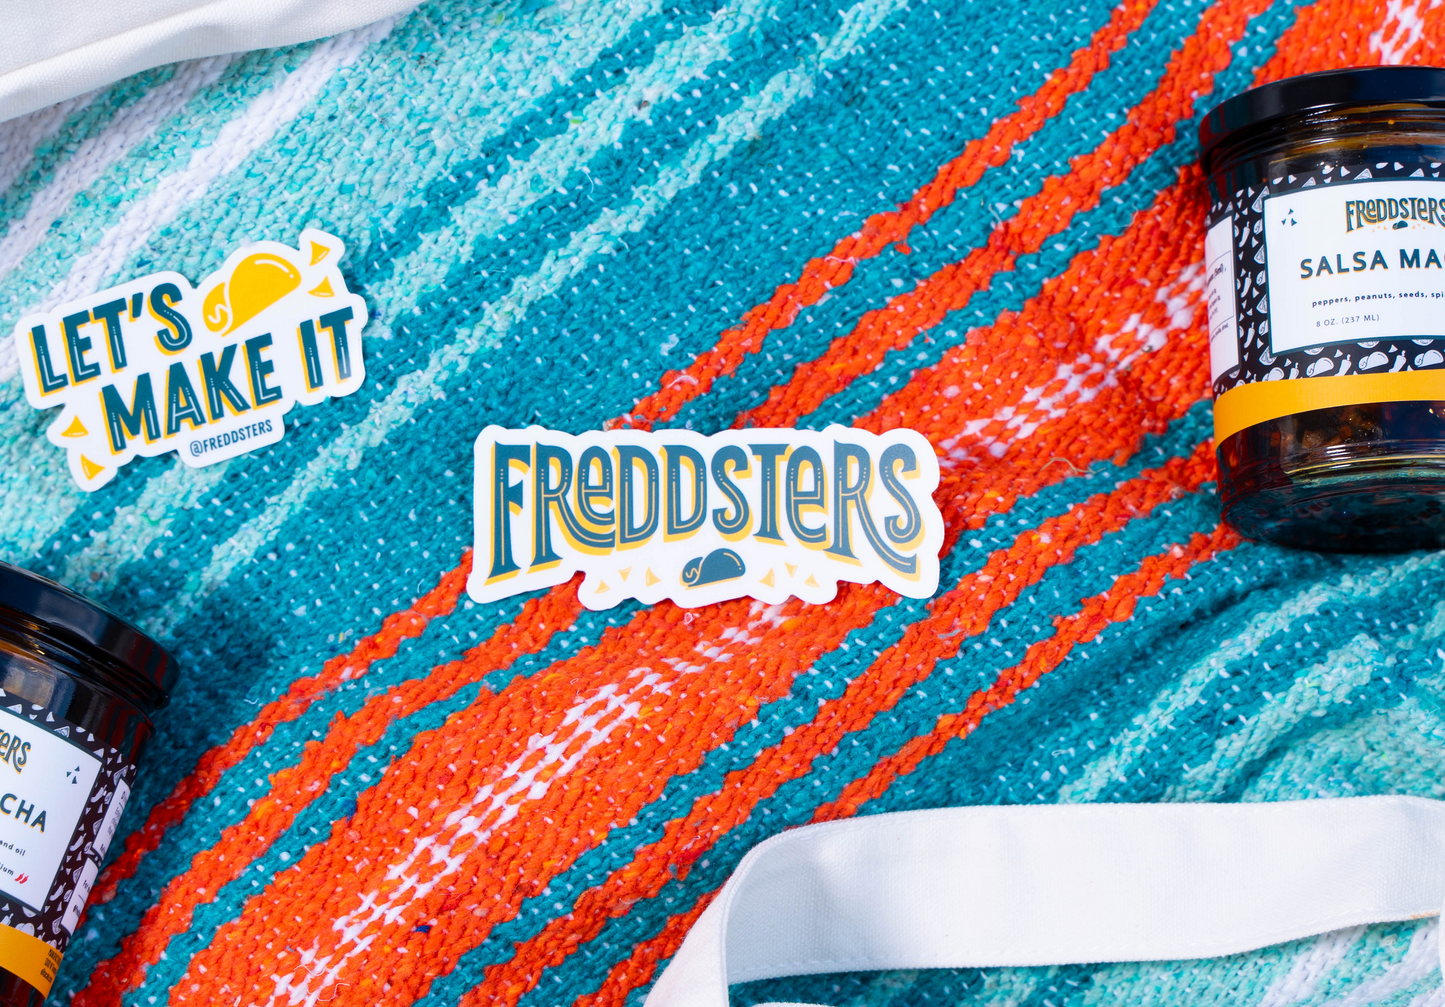 Freddsters Stickers